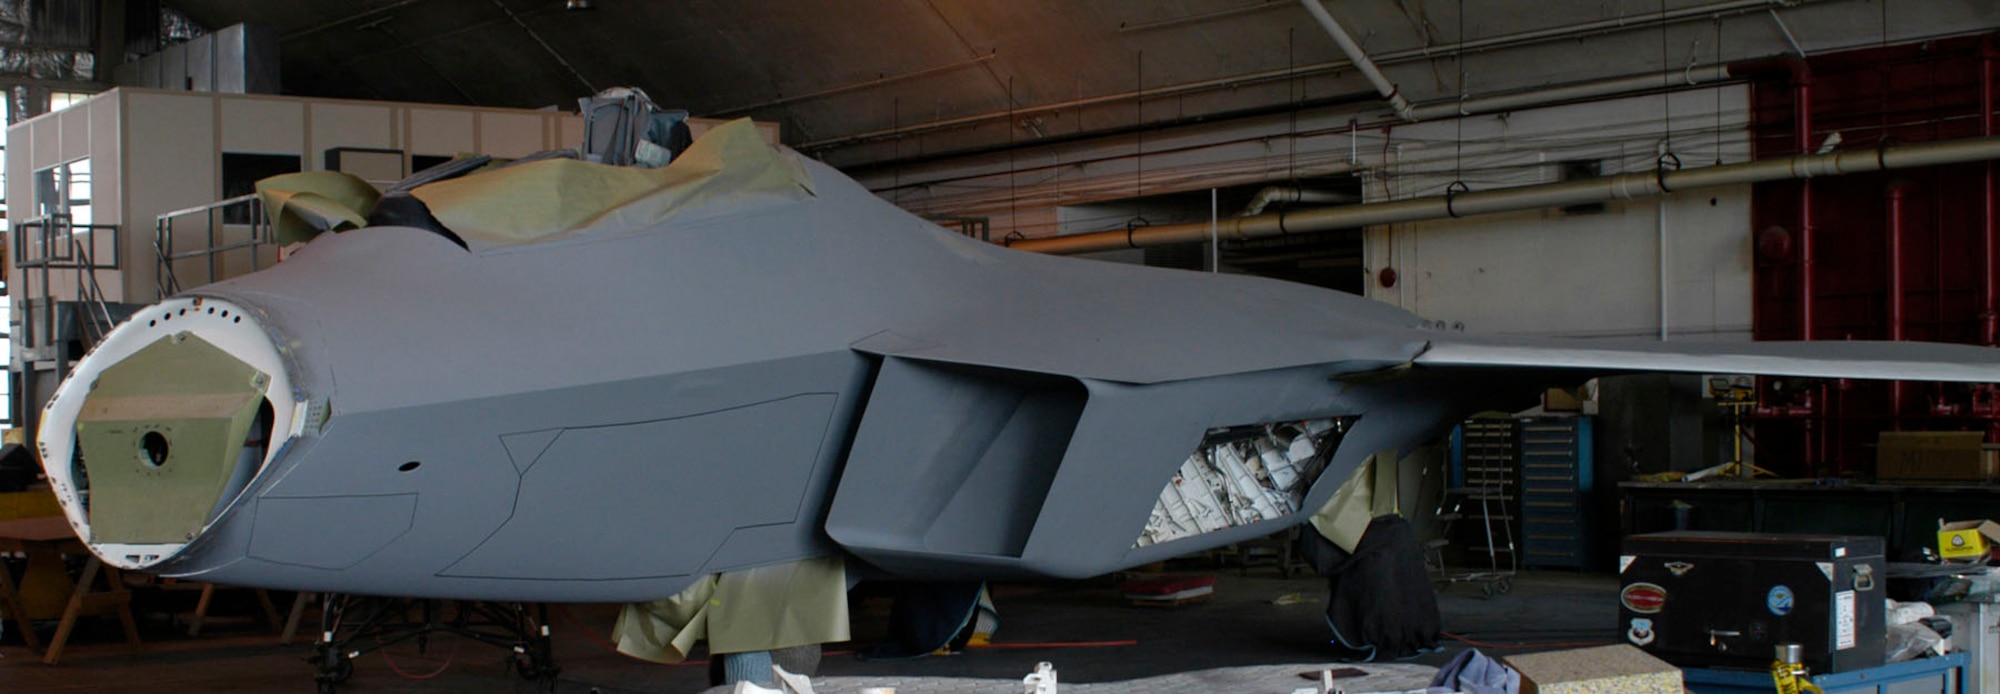 DAYTON, Ohio (06/2007) -- F-22A Raptor in the National Museum of the U.S. Air Force's restoration hangar. (U.S. Air Force photo)